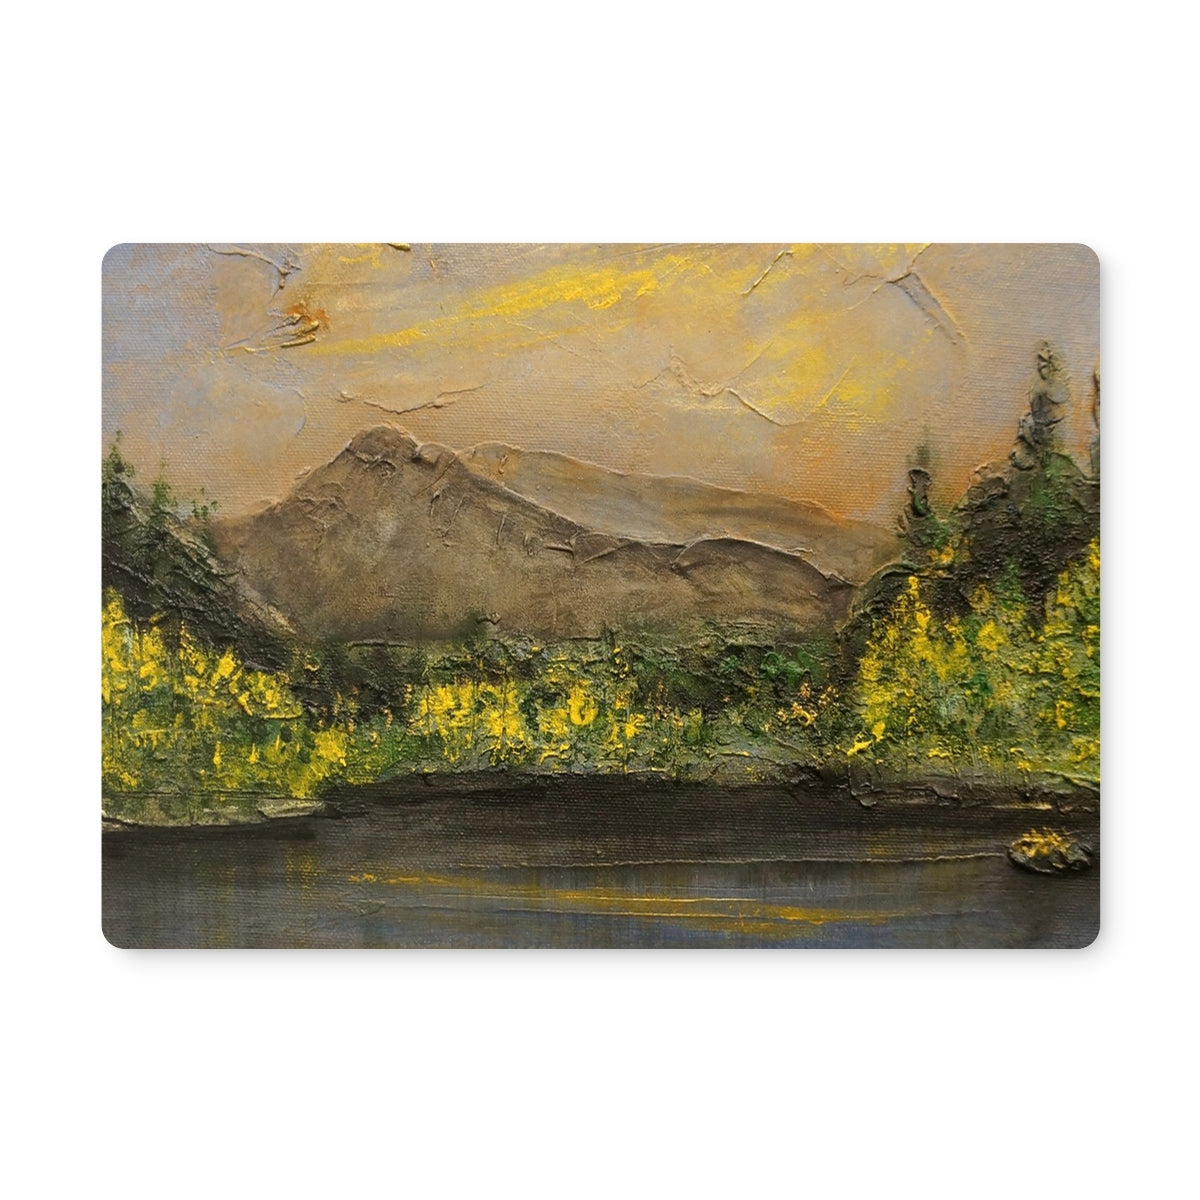 Glencoe Lochan Dusk Art Gifts Placemat-Placemats-Scottish Lochs & Mountains Art Gallery-4 Placemats-Paintings, Prints, Homeware, Art Gifts From Scotland By Scottish Artist Kevin Hunter